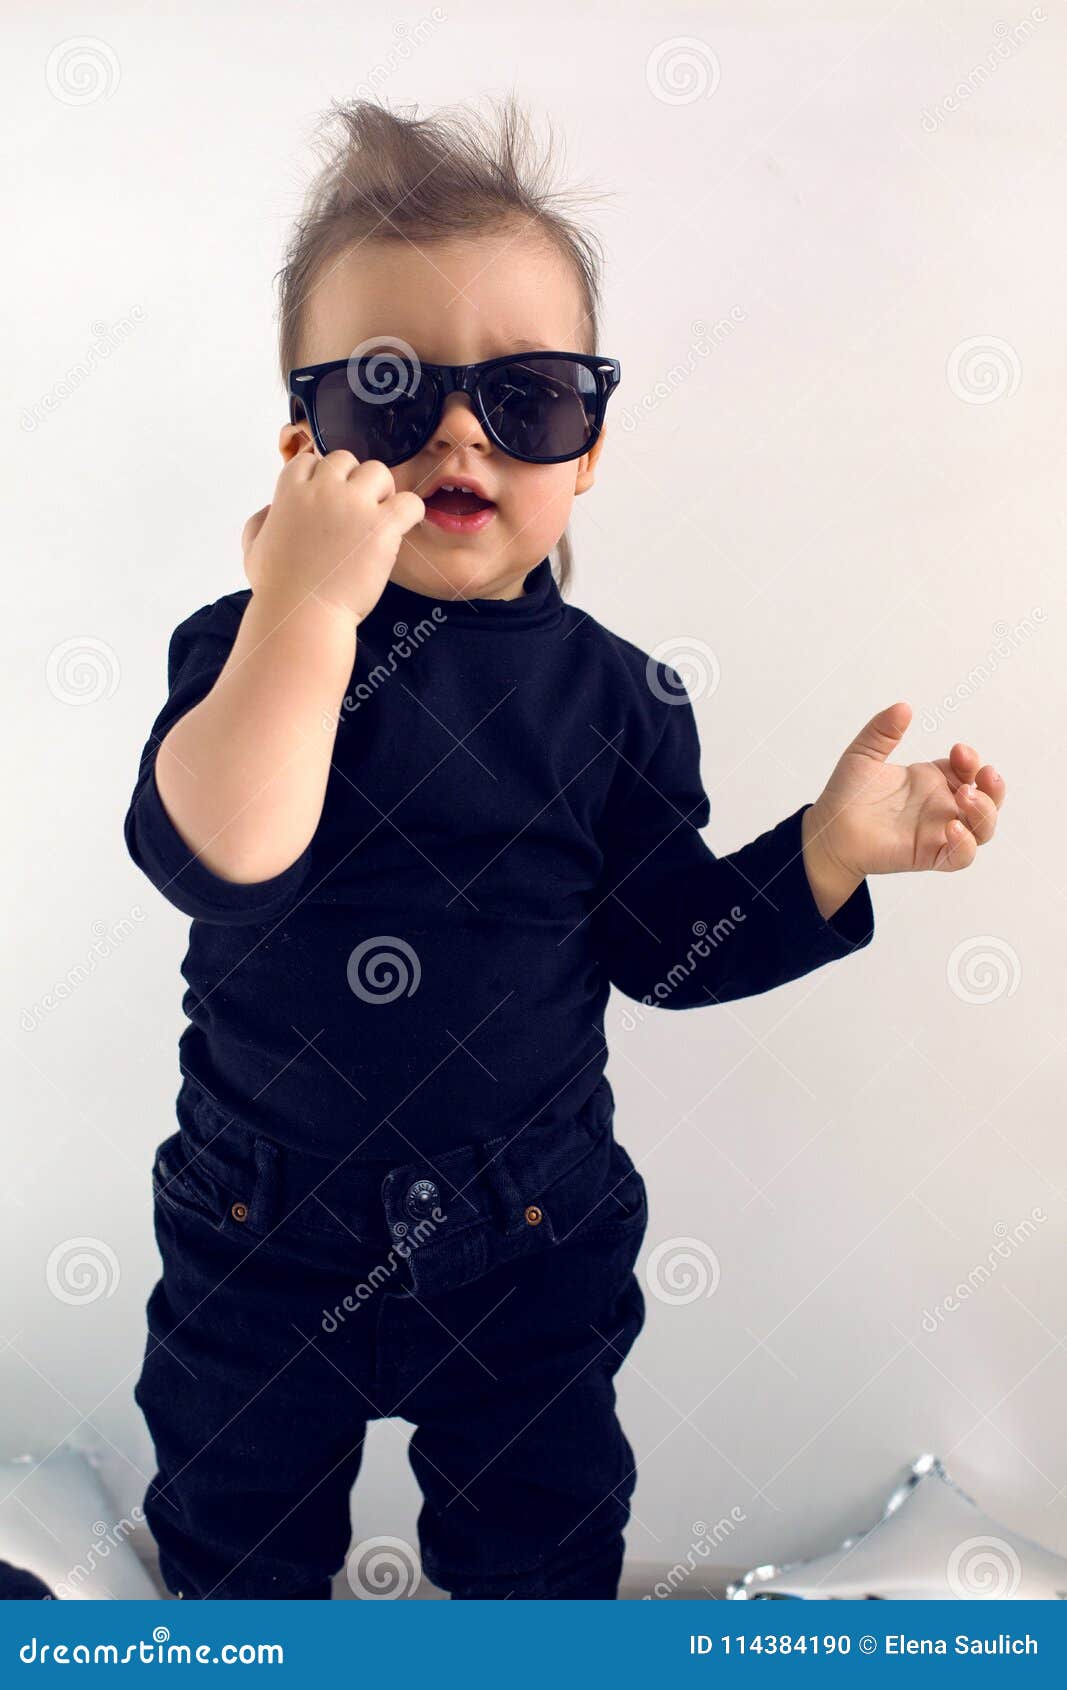 Stylish Baby Boy in Black Rocker Clothes and Sunglasses Stock ...